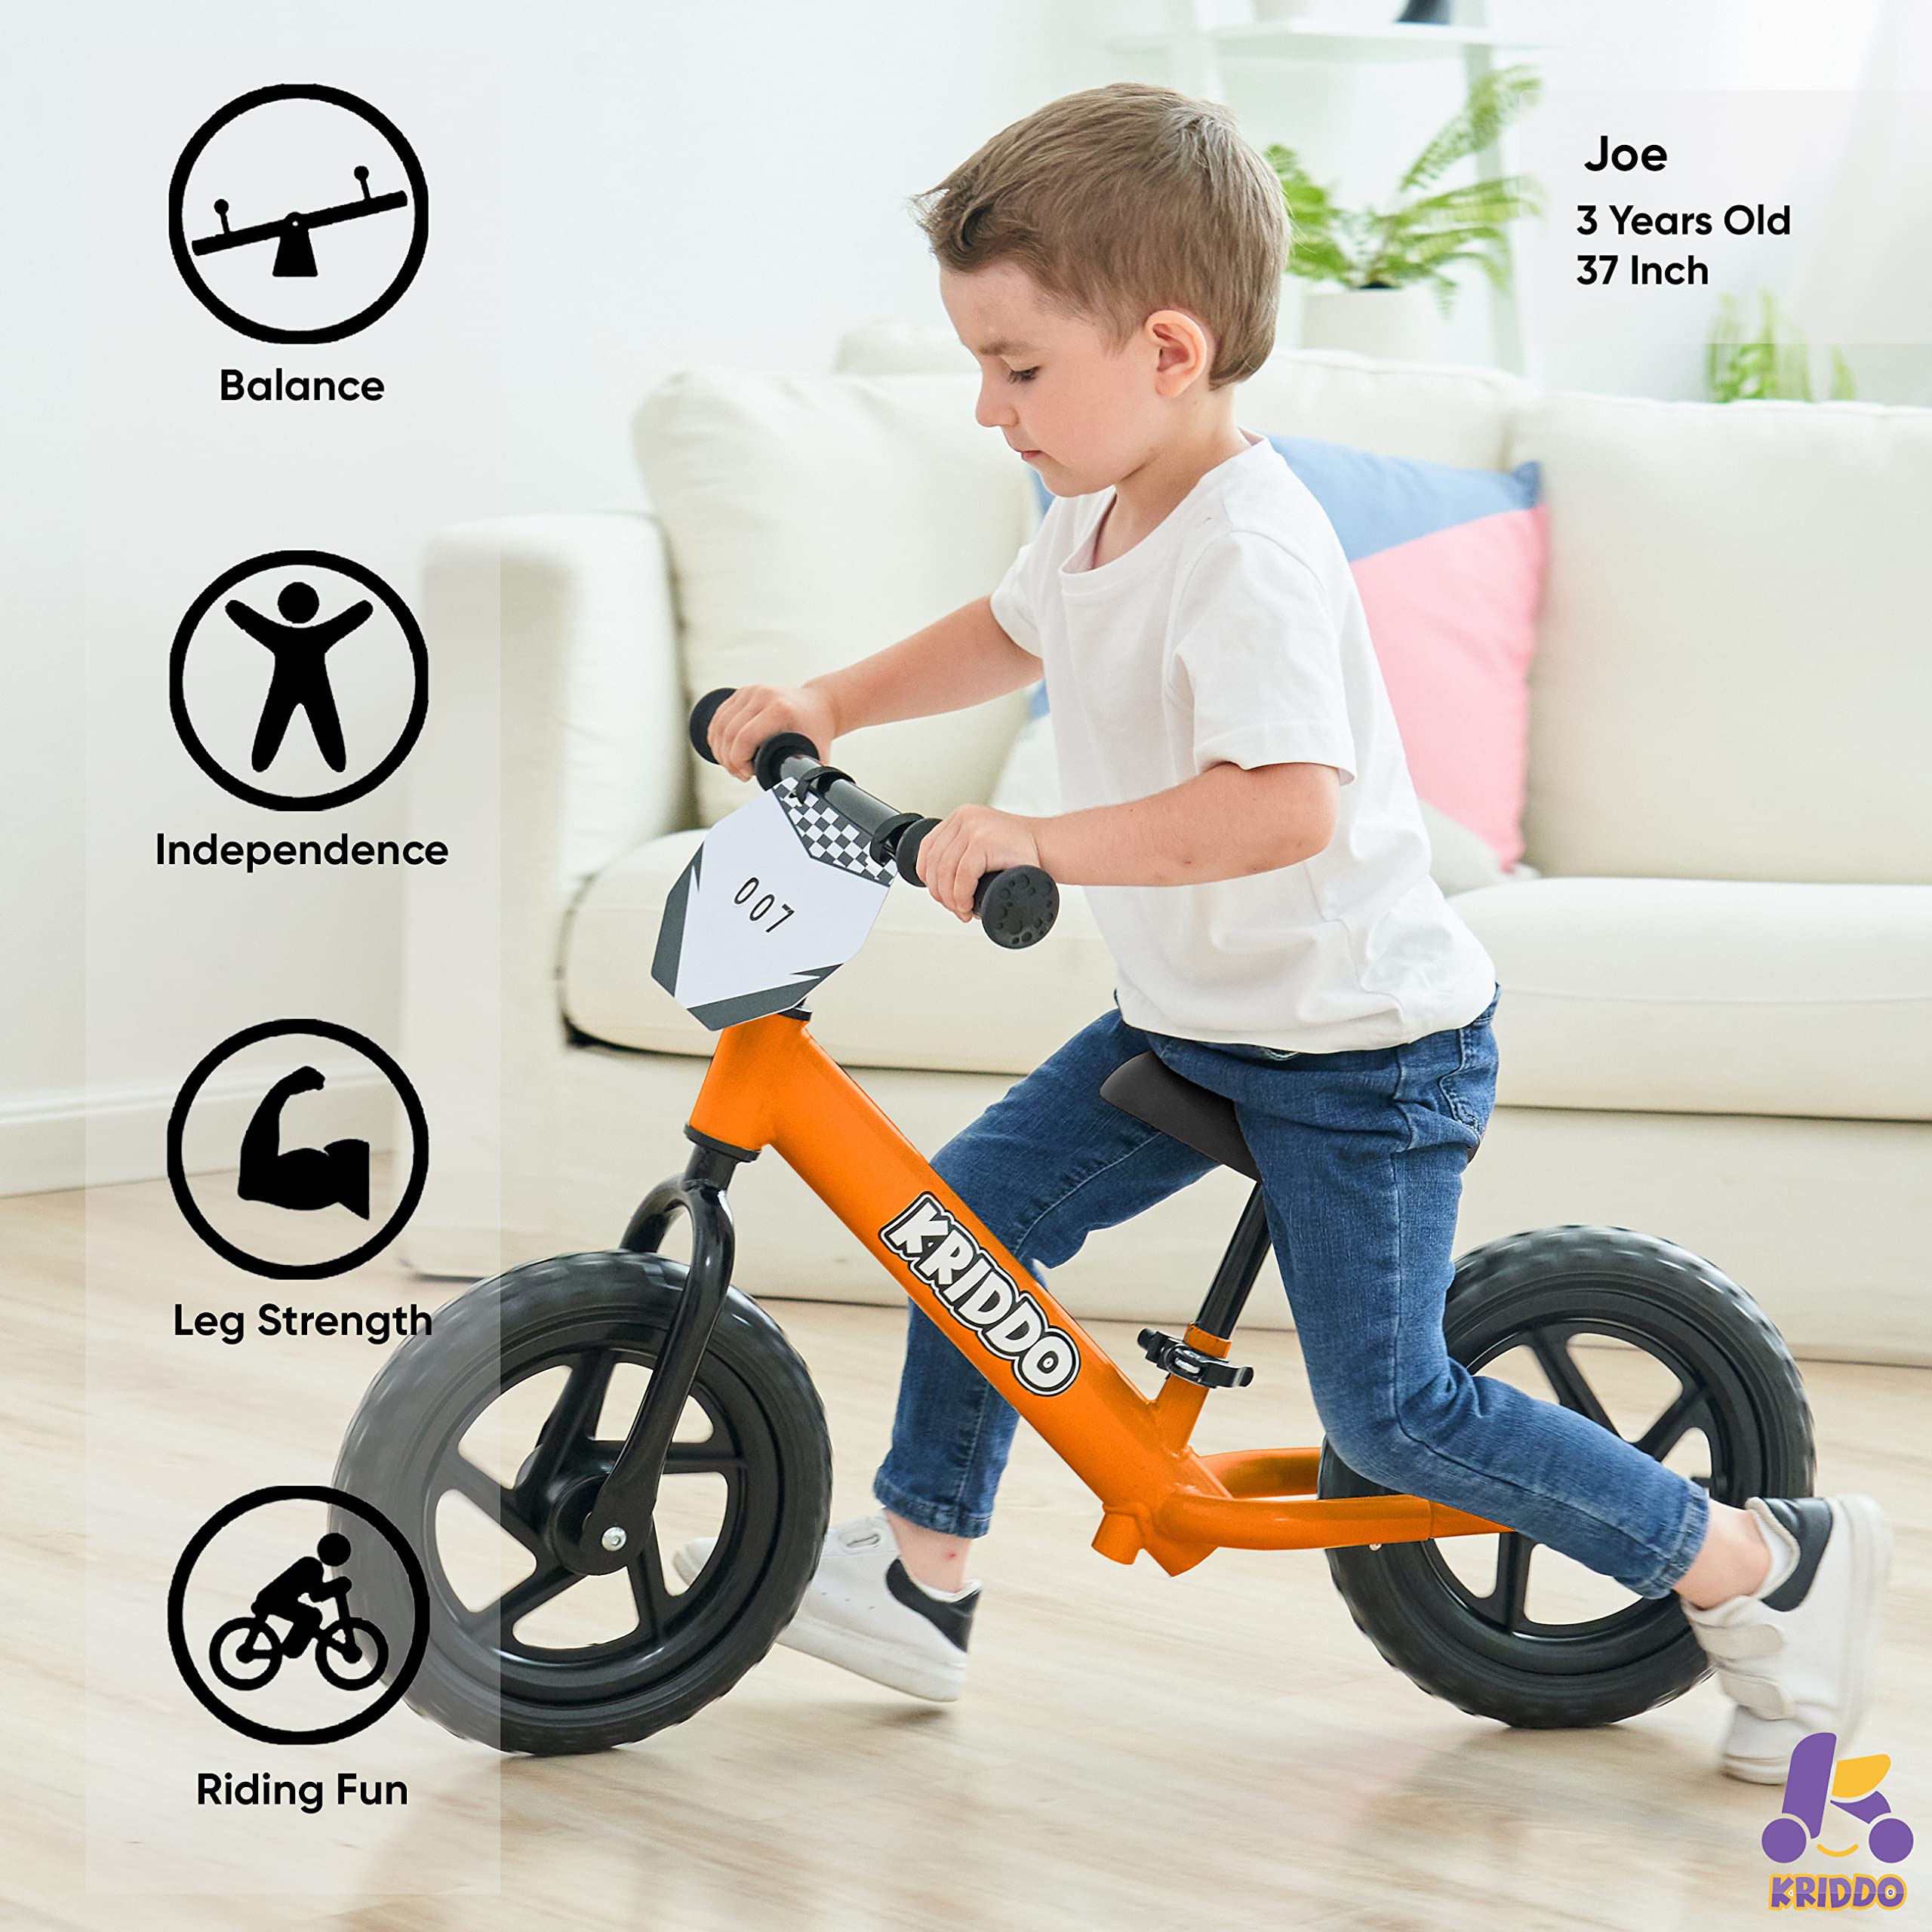 KRIDDO Toddler Balance Bike 2 Year Old, Age 18 Months to 5 Years Old, 12 Inch Push Bicycle with Customize Plate (3 Sets of Stickers Included), Steady Balancing, Gift Bike for 2-3 Boys Girls, Orange